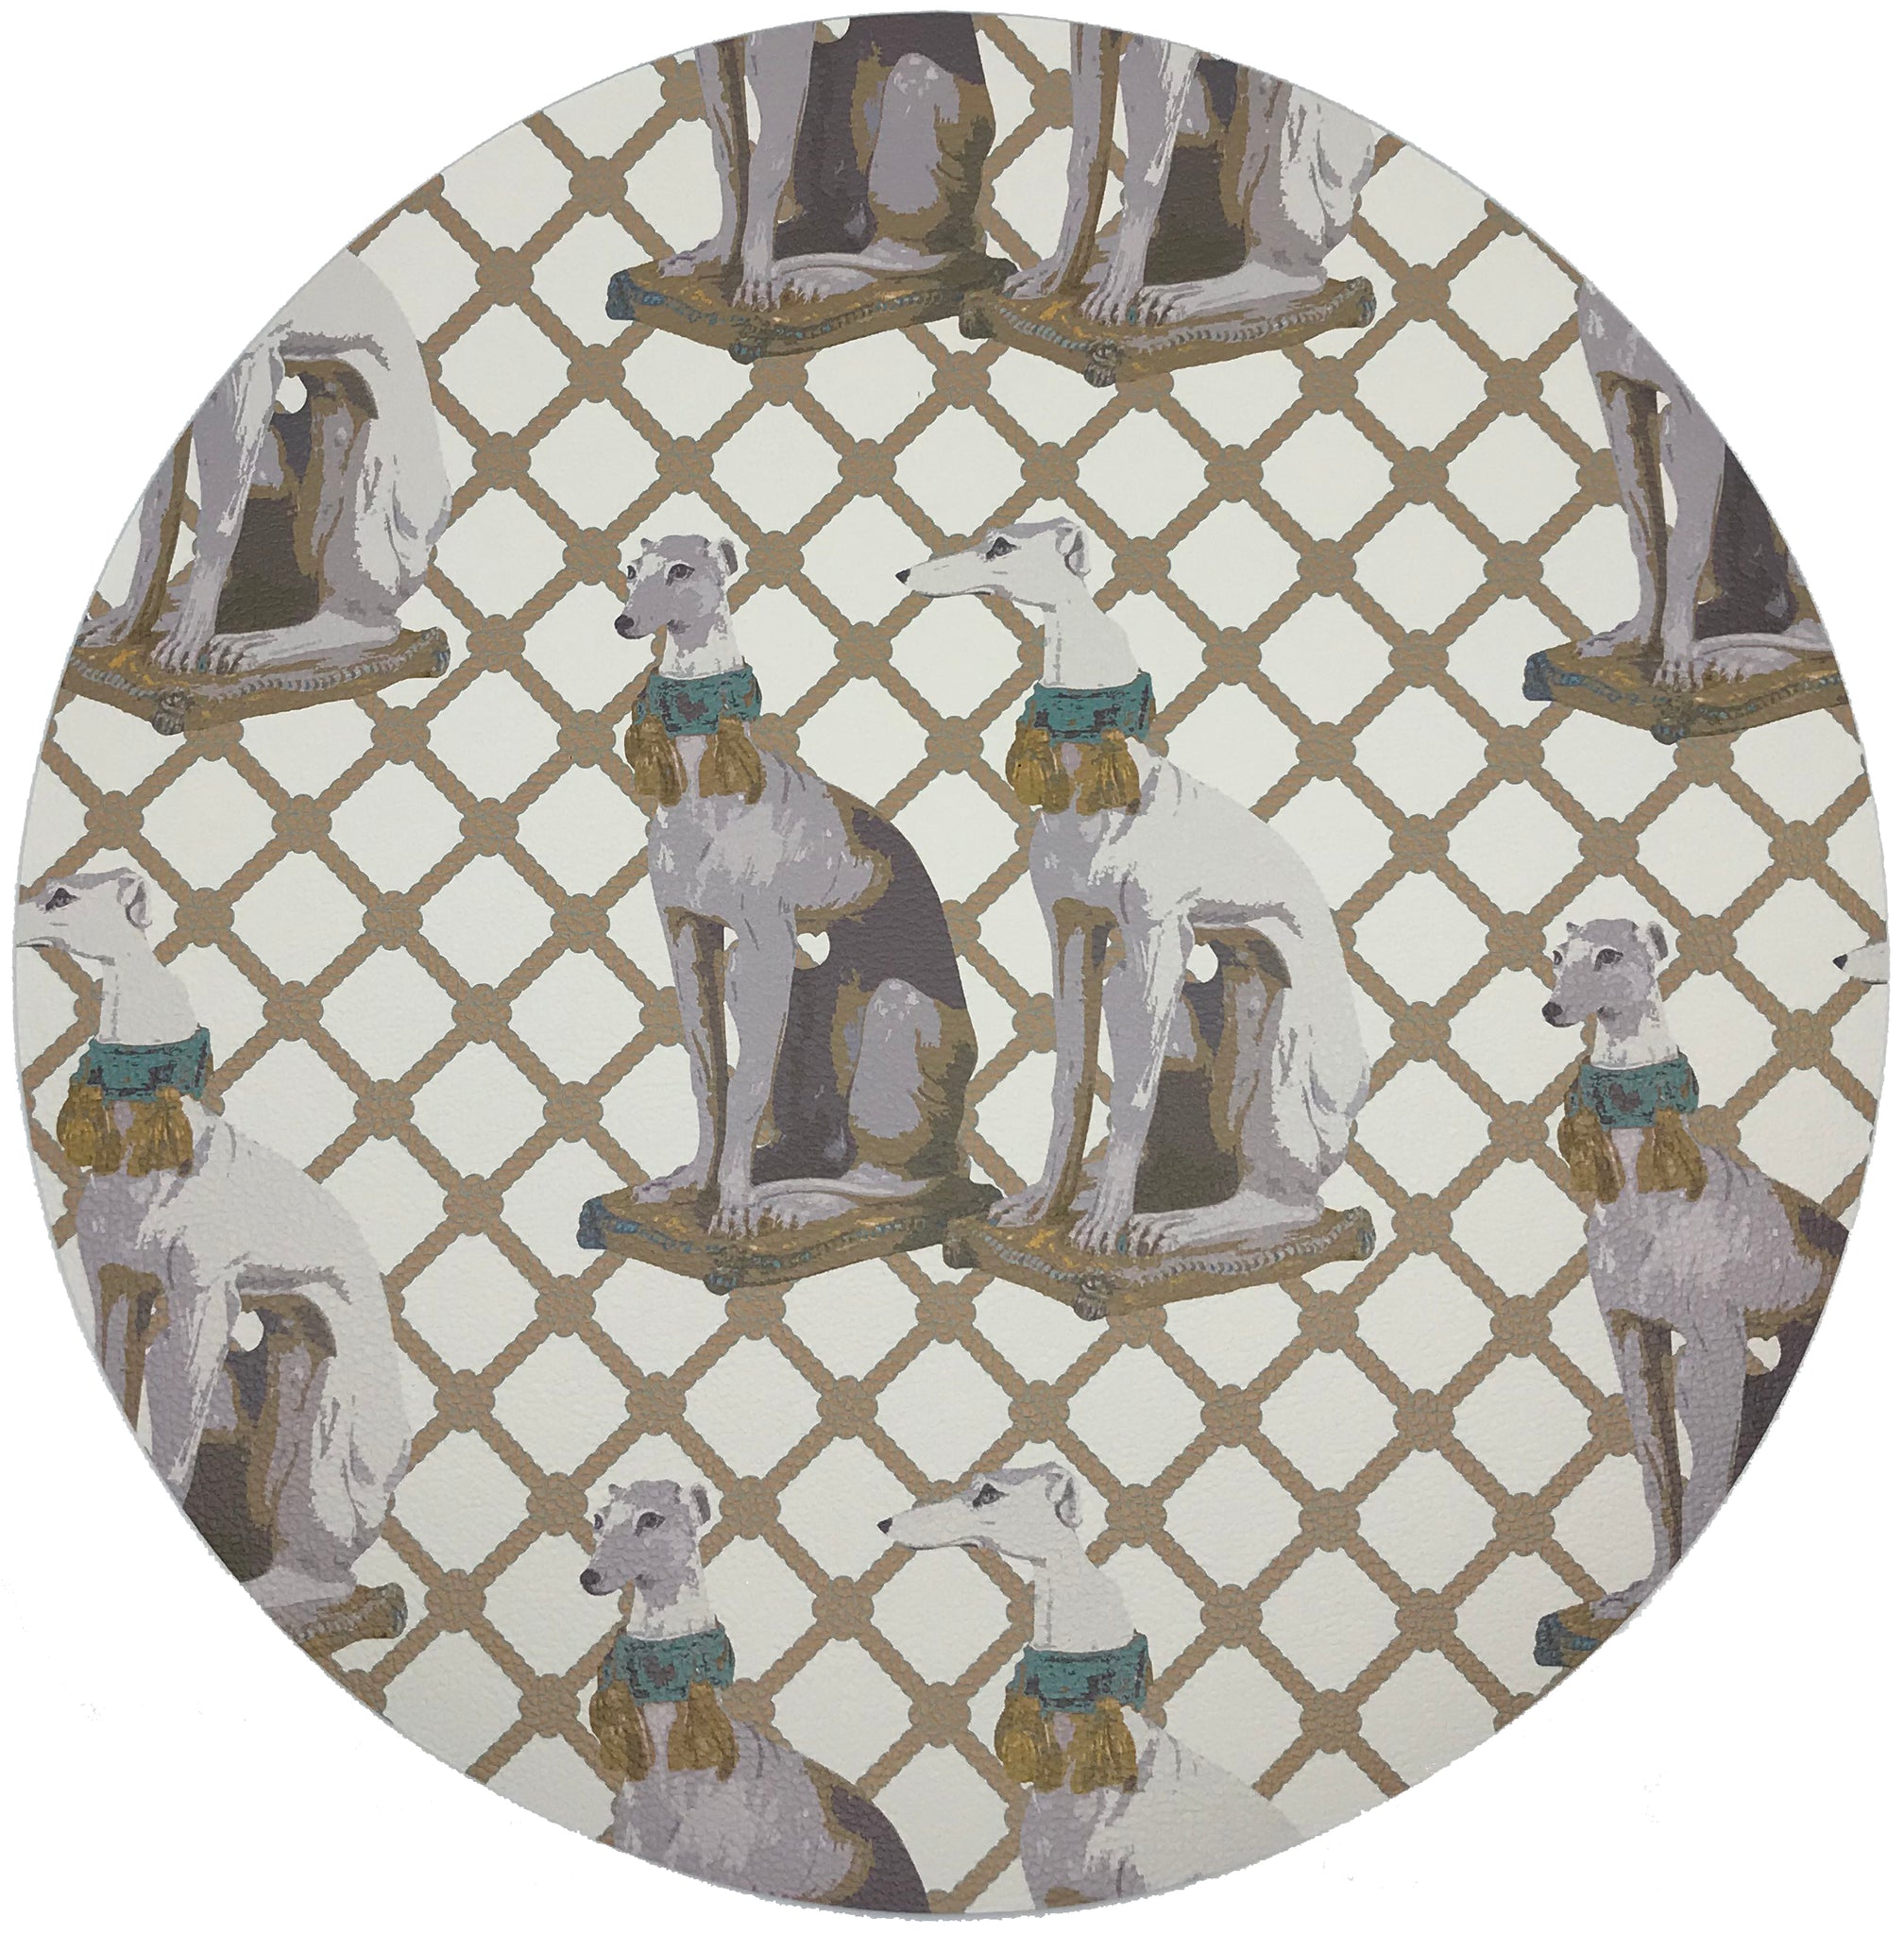 Regal Greyhound Luxe 16" Round Pebble Placemats, Set Of 4 - nicolettemayer.com